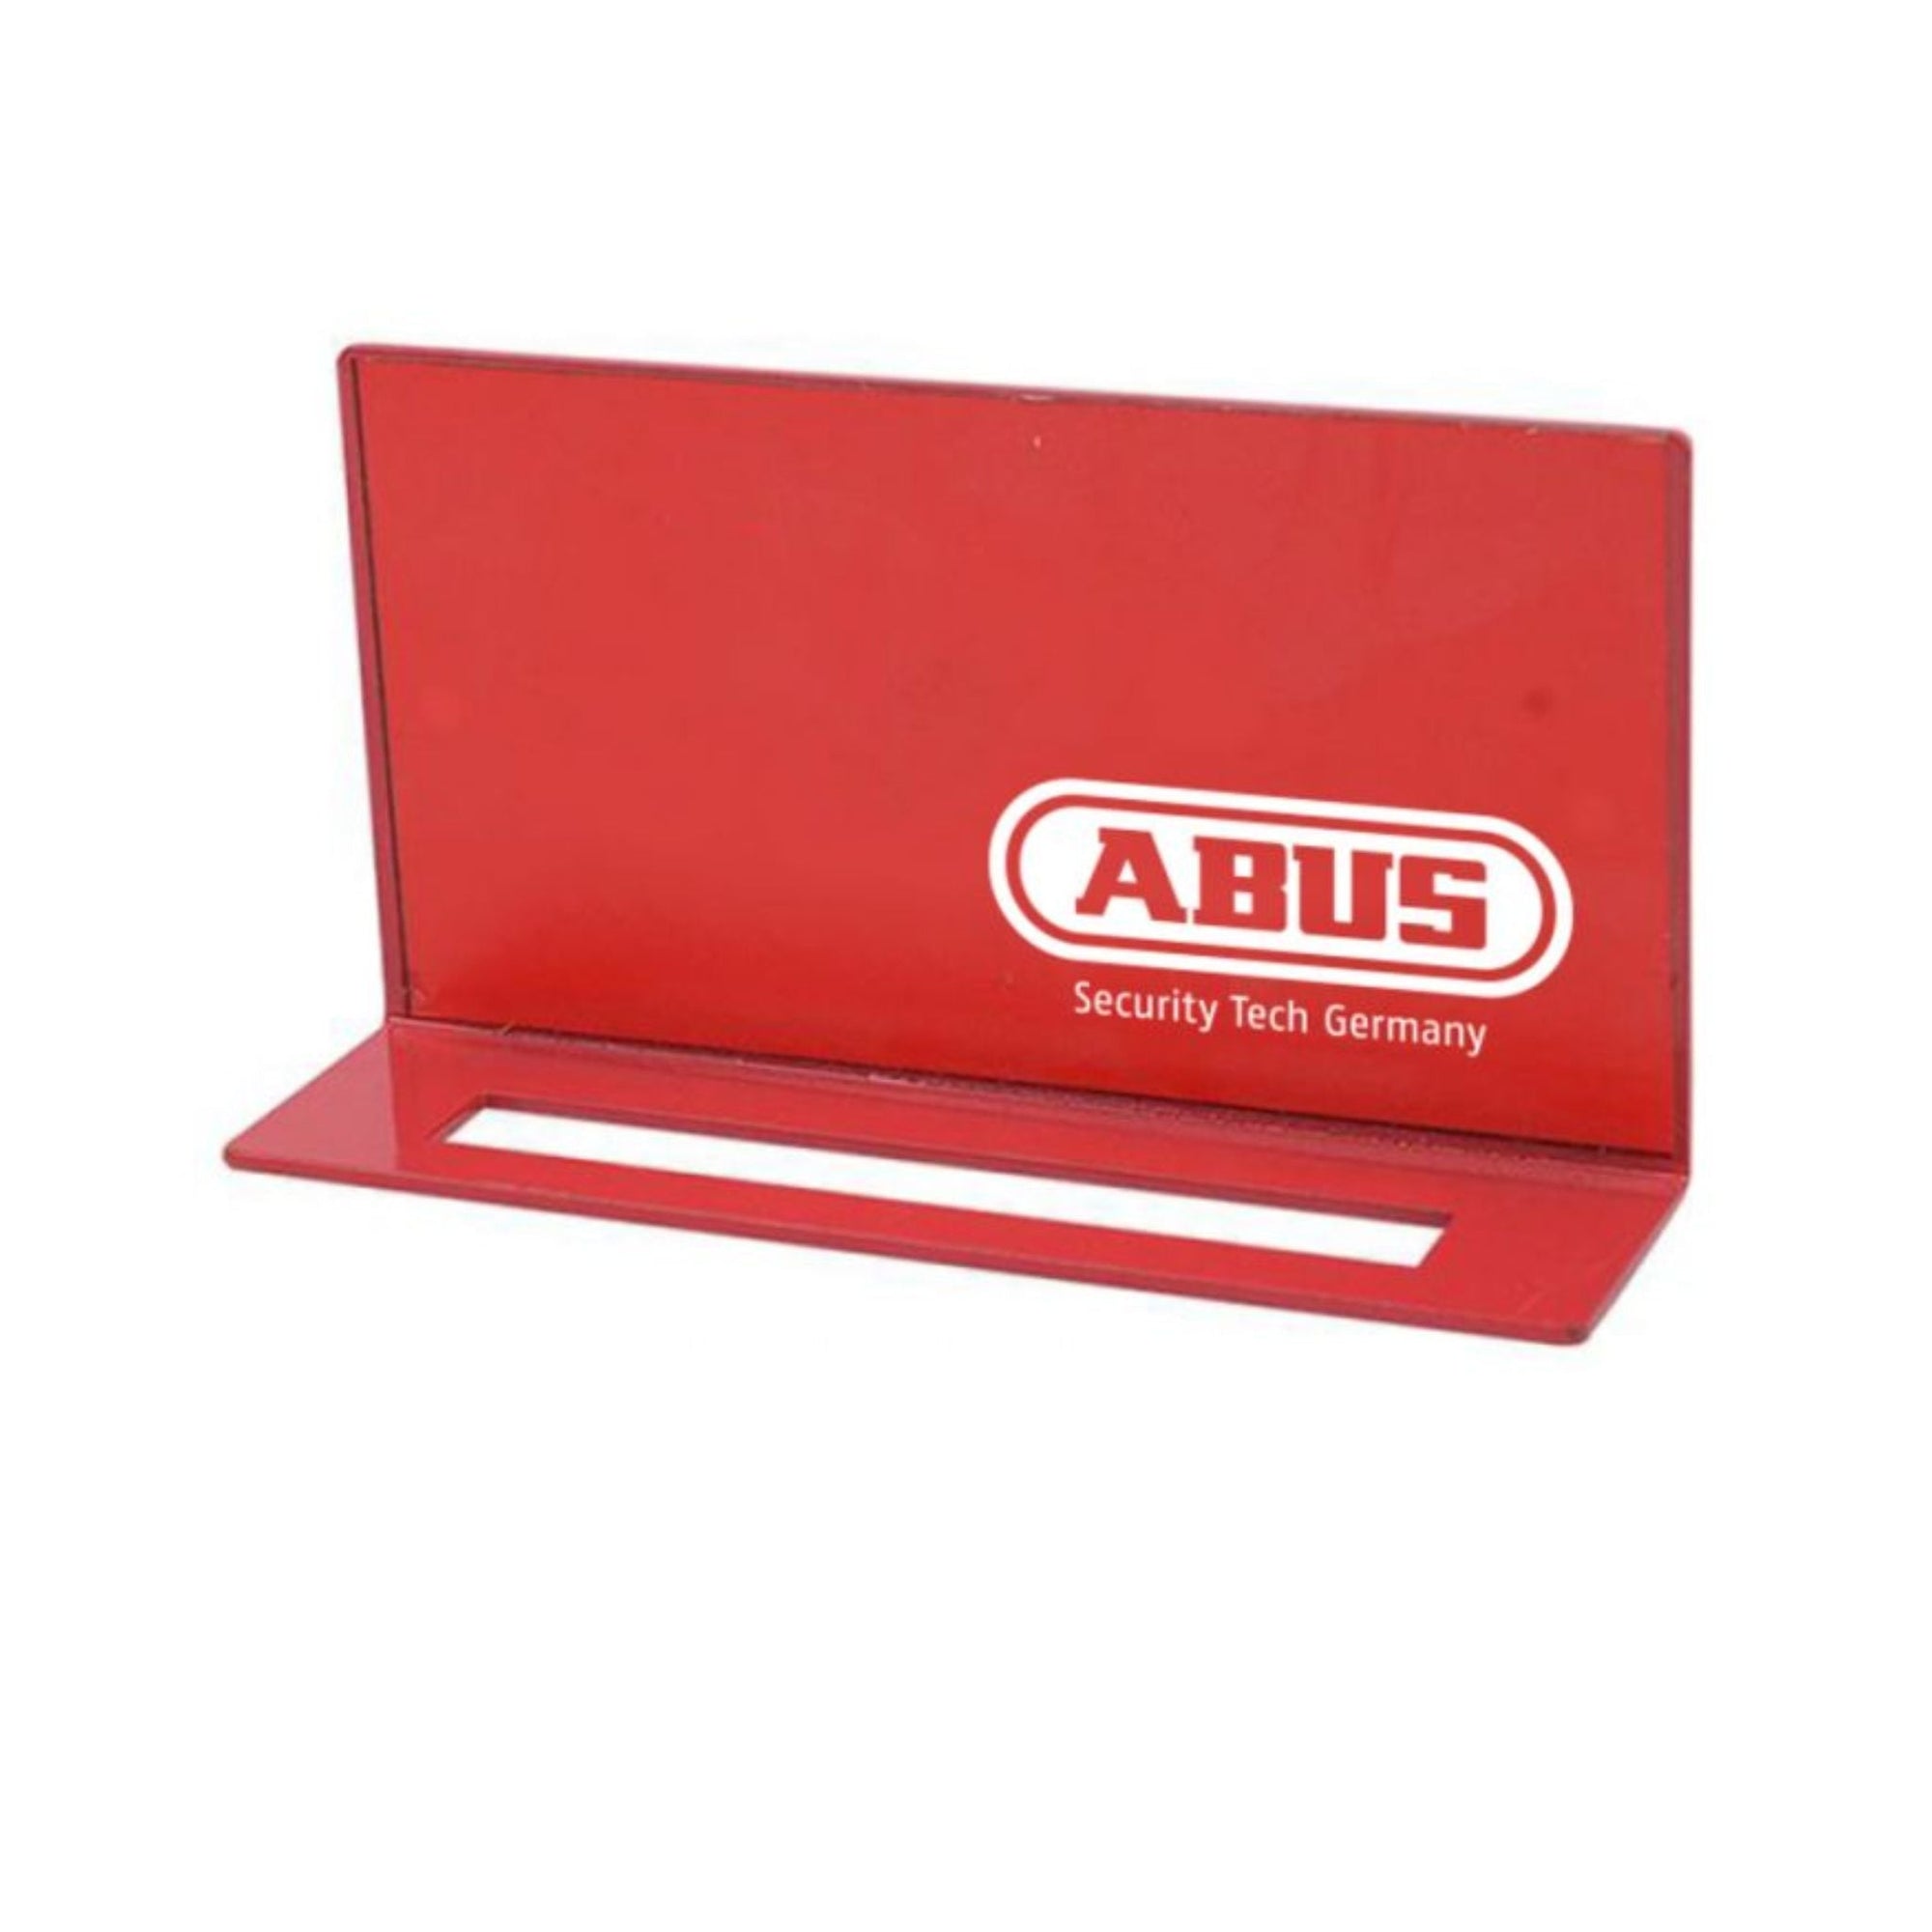 Abus 18030 Small Padlock Station Can Wall Mount Near Lockout Point and Hold 5 Padlocks (Sold Separate) - The Lock Source